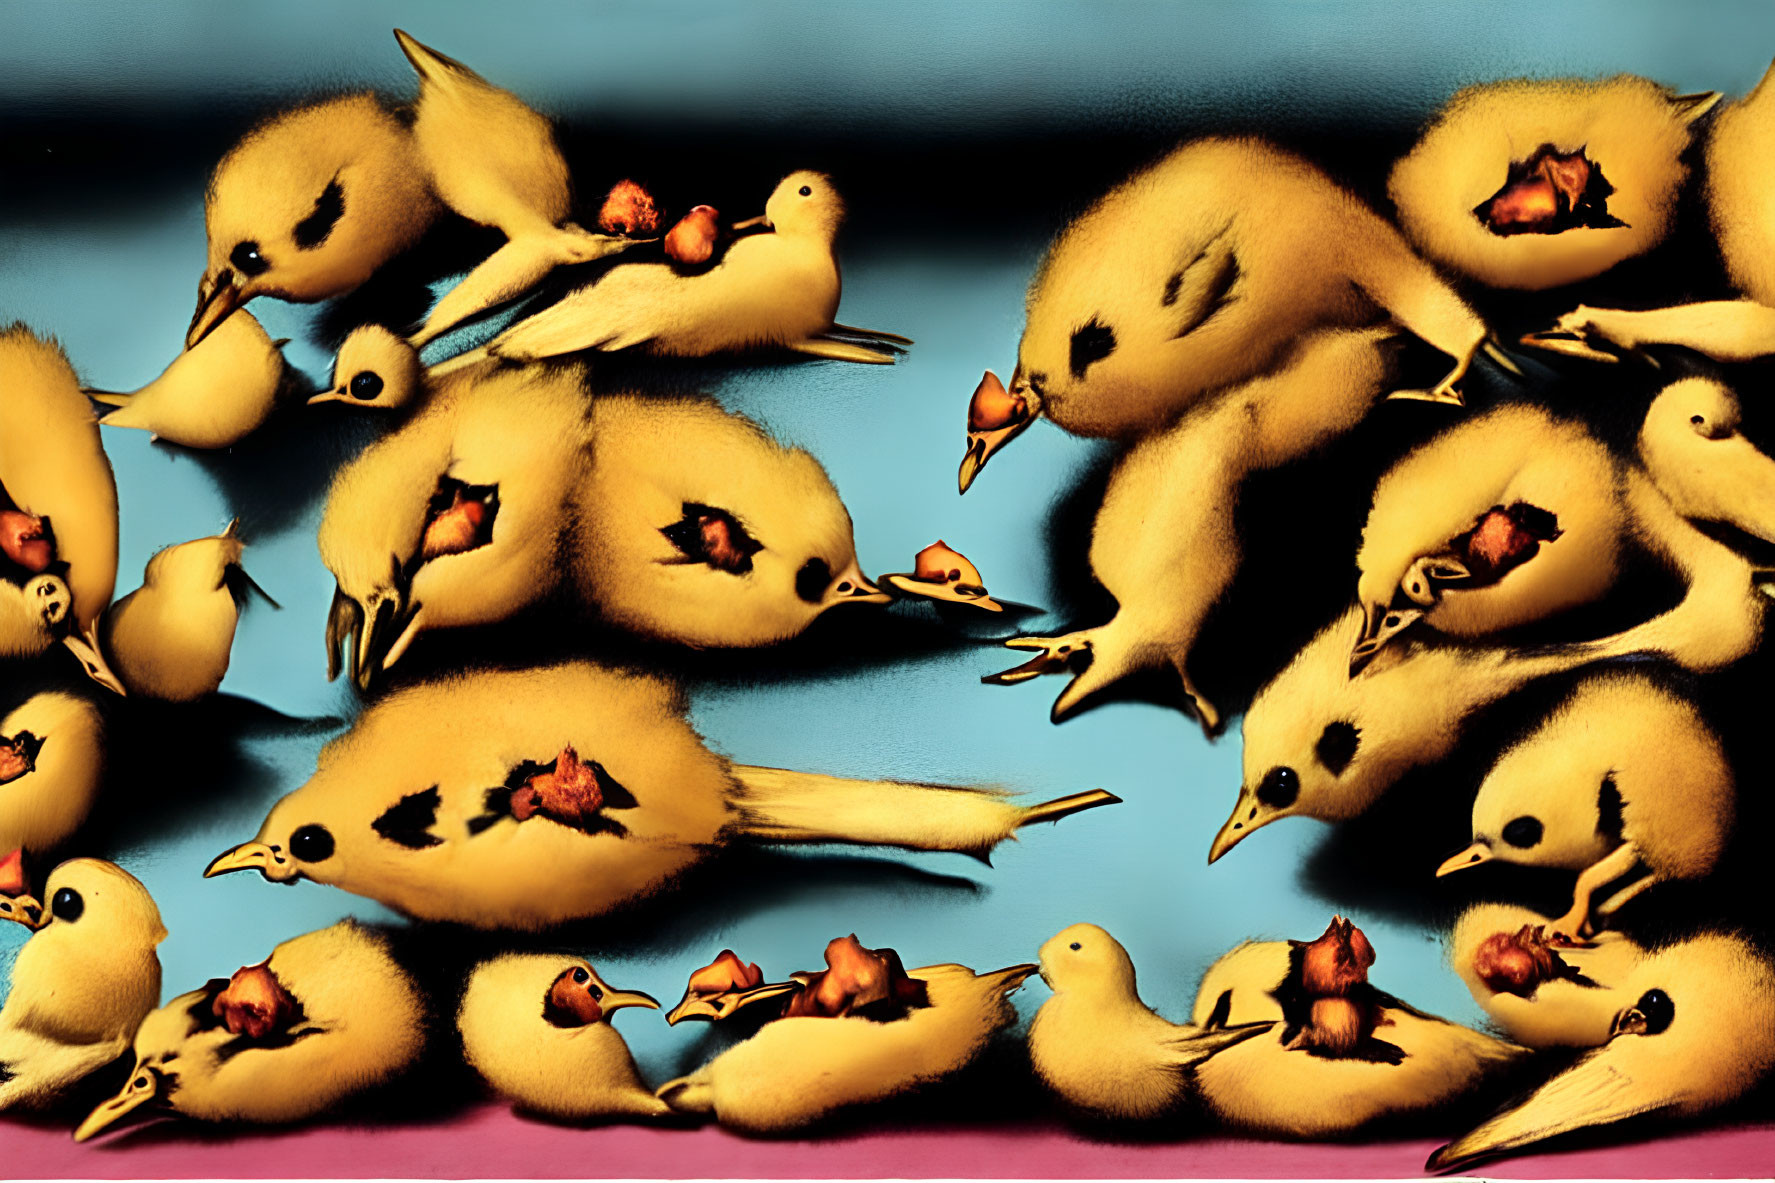 Surreal illustration of multiple yellow chicks with unique features scattered across their bodies